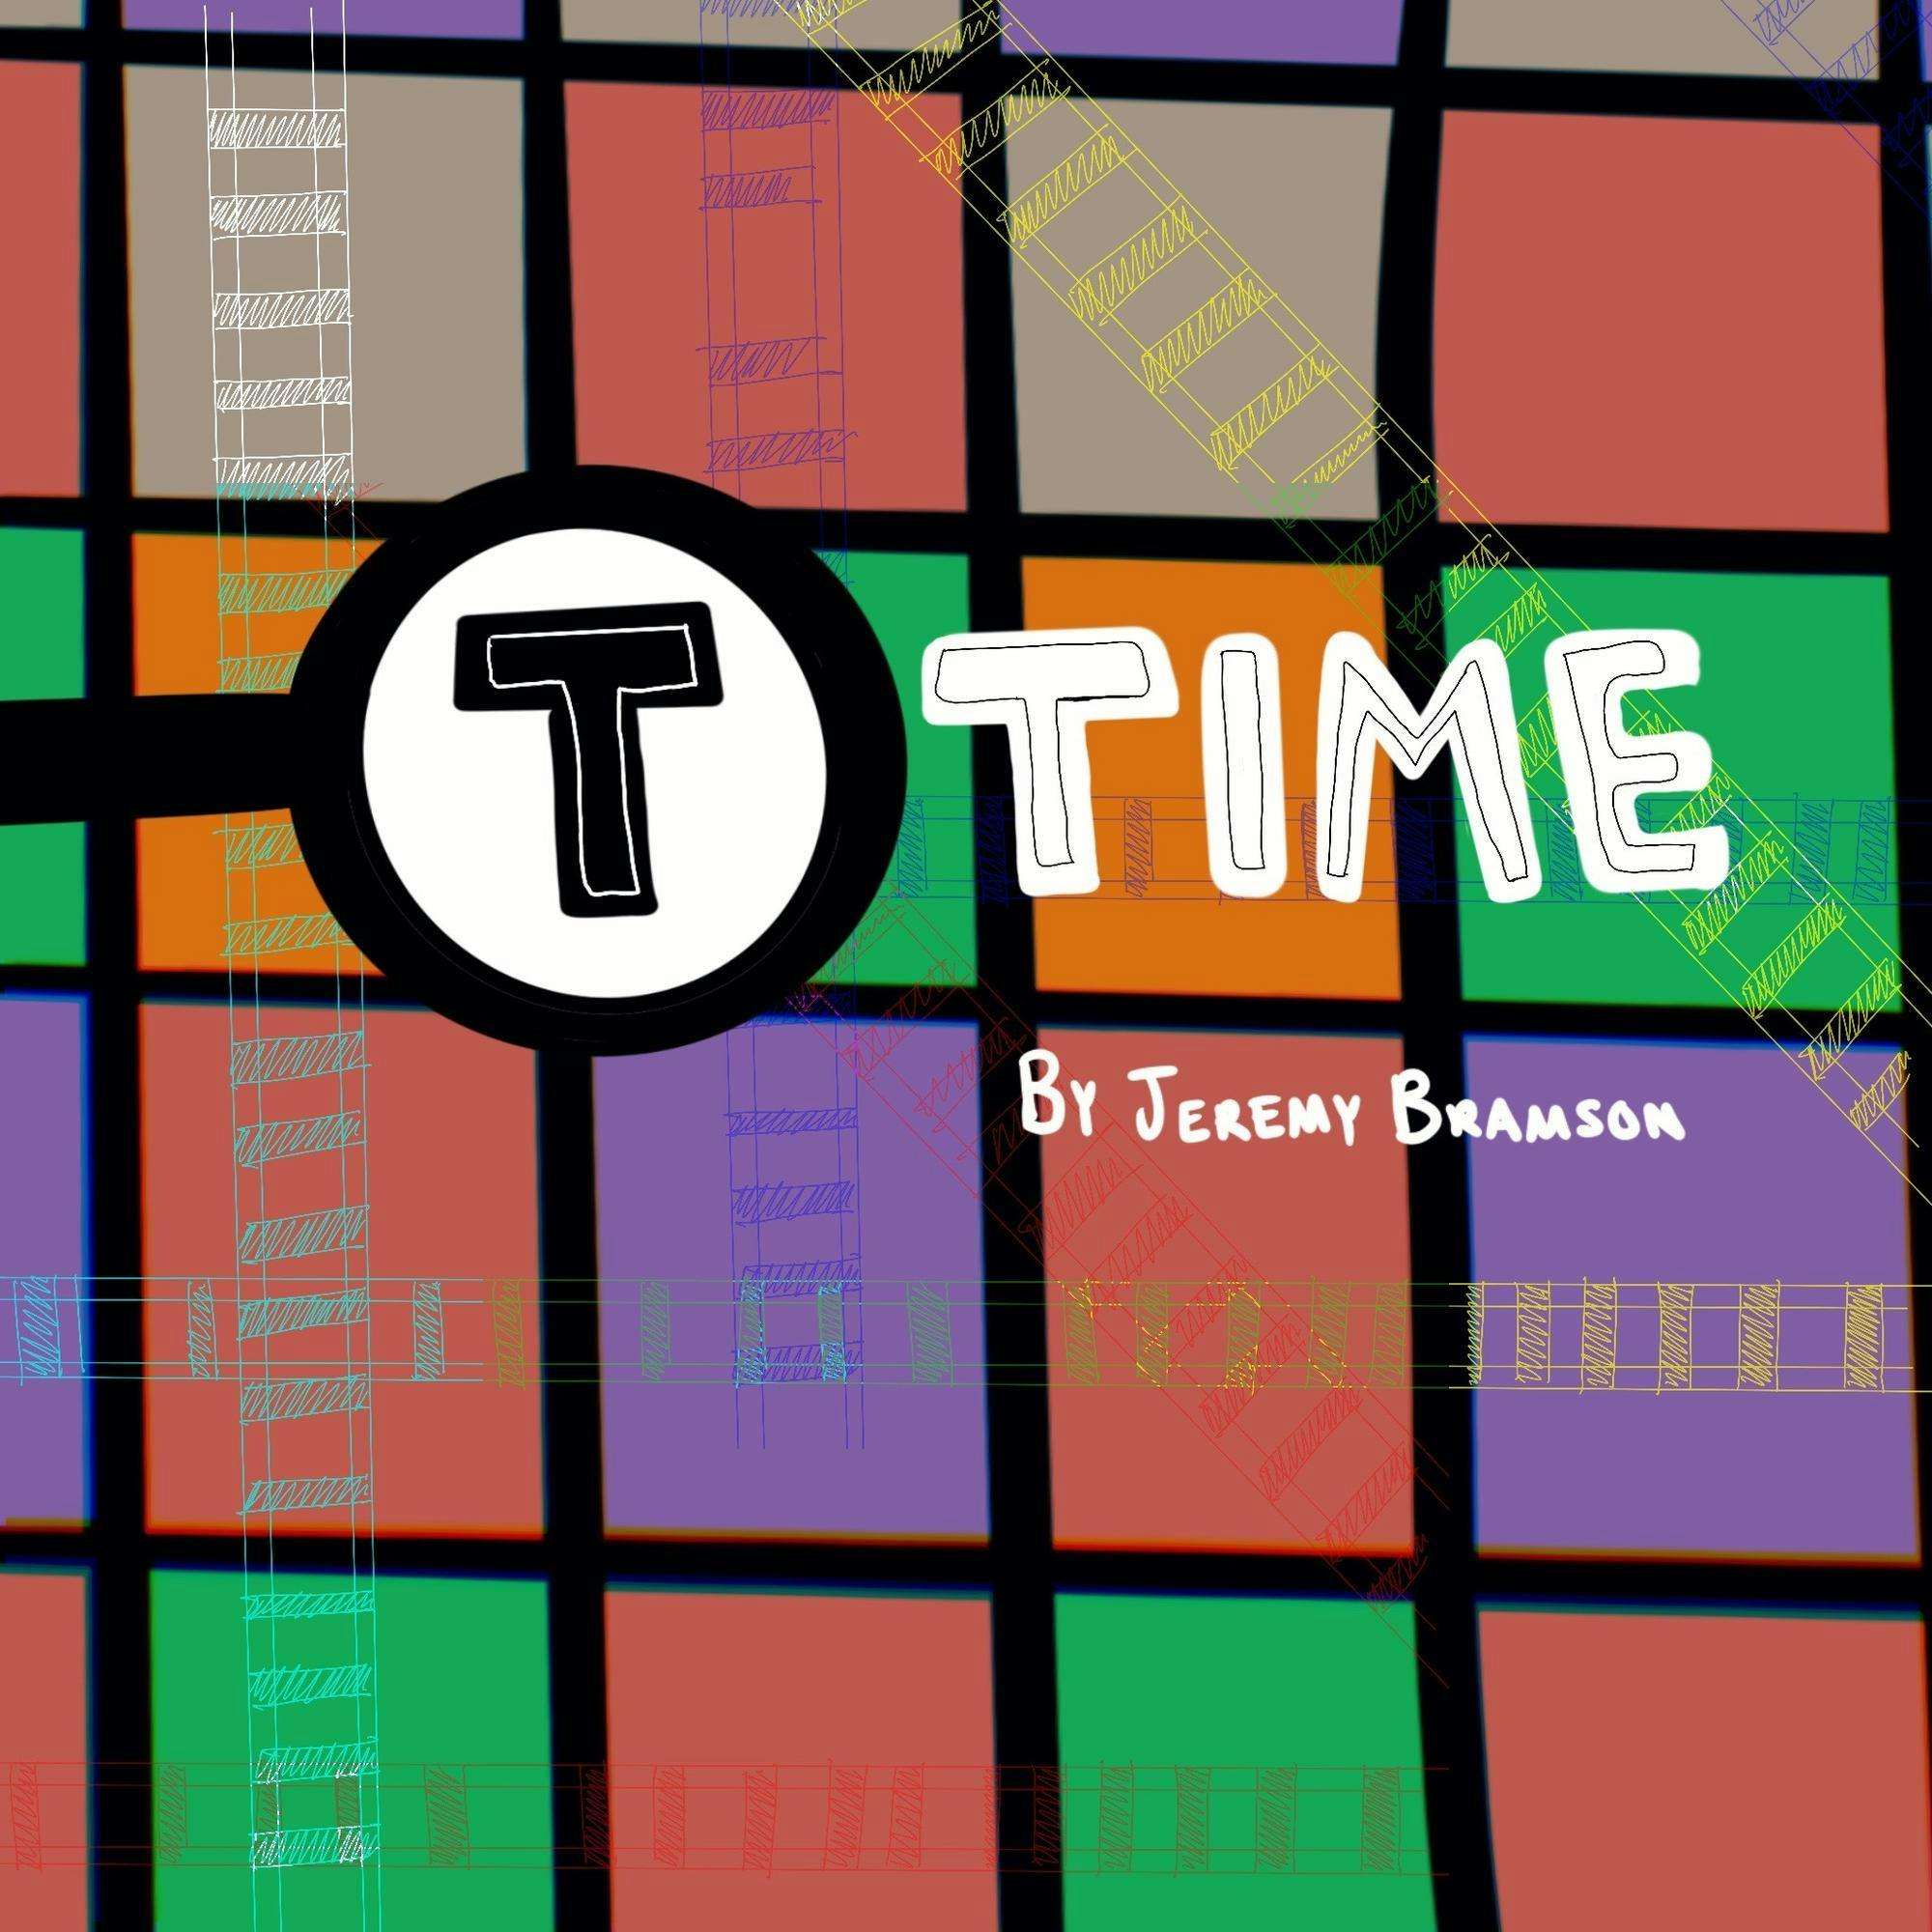 graphic for Jeremy Gramson's "T Time" column